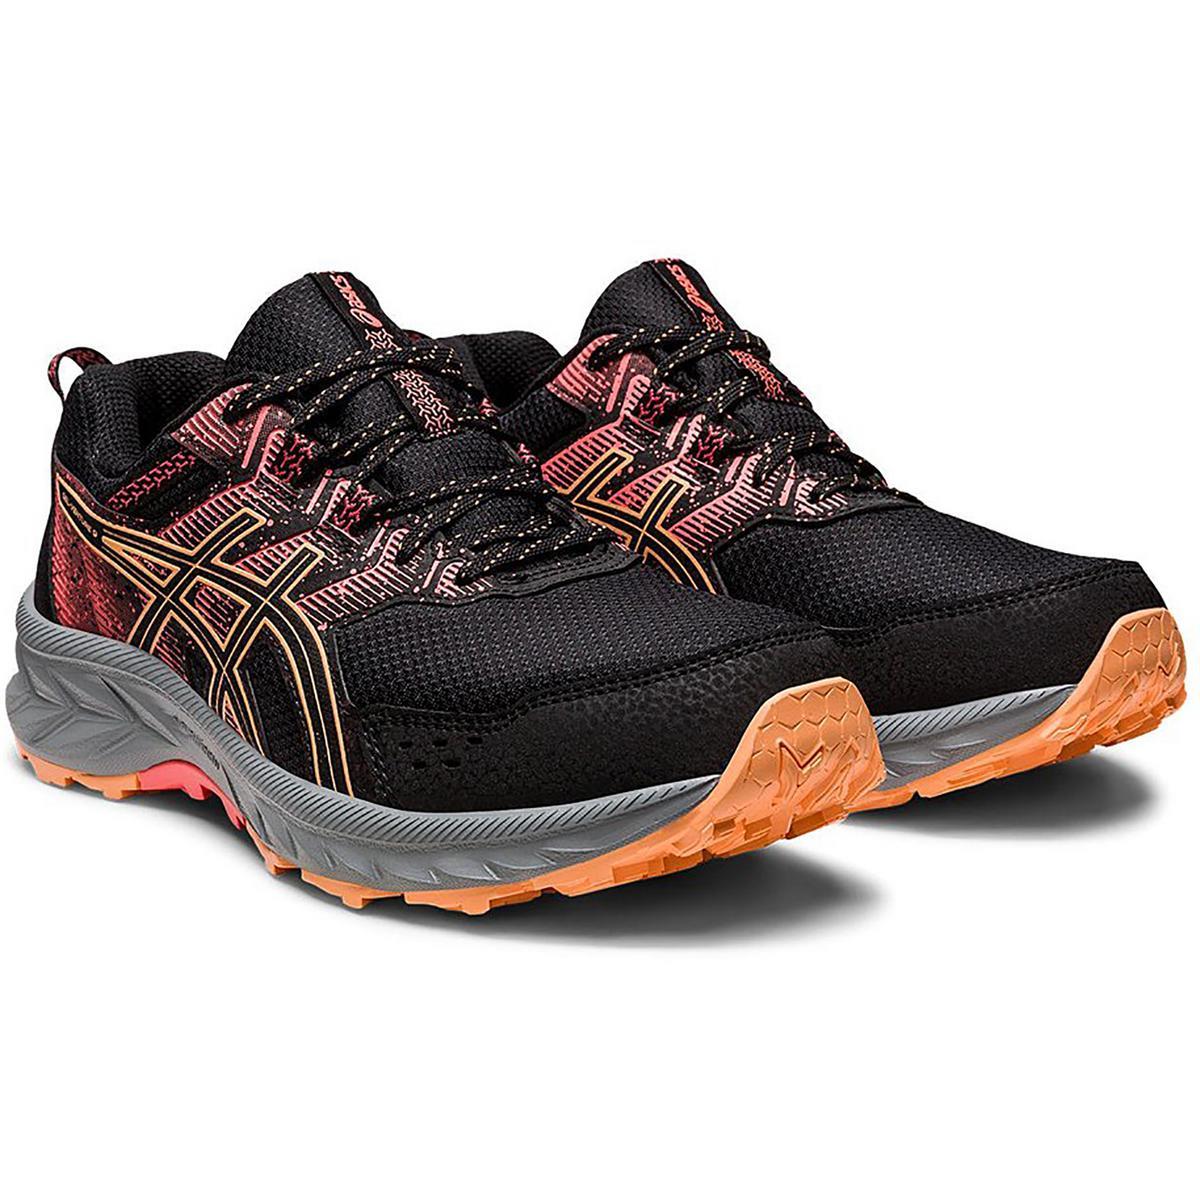 Asics Womens Gel-venture 9 Gym Athletic and Training Shoes Sneakers Bhfo 6559 Black/Summer Dune